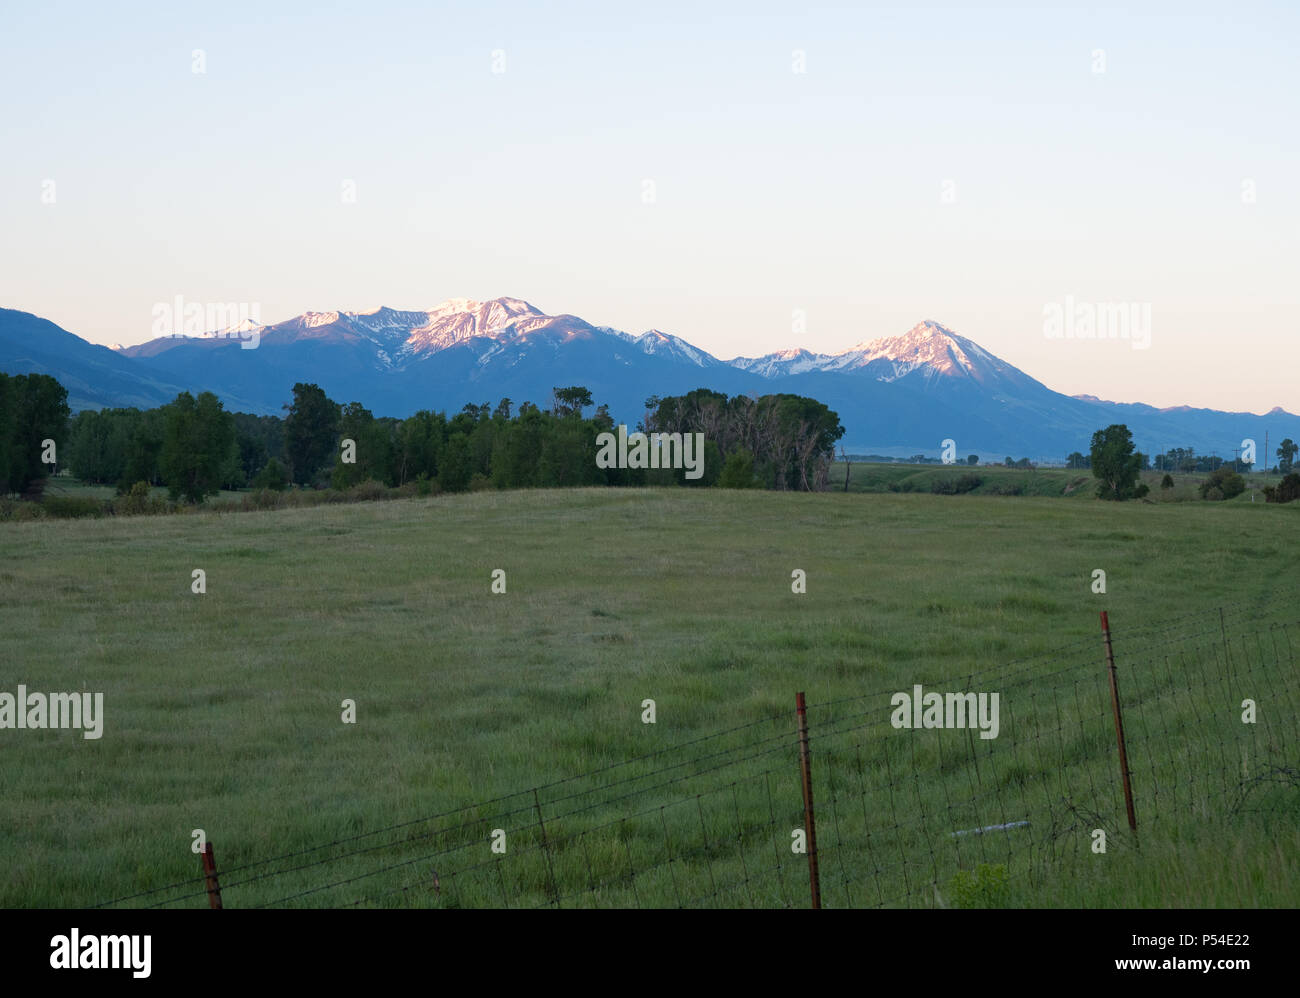 Snow capped mountains in the Absaroka Range in Montana with a fenced pasture in the foreground. Photographed at sunrise. Stock Photo